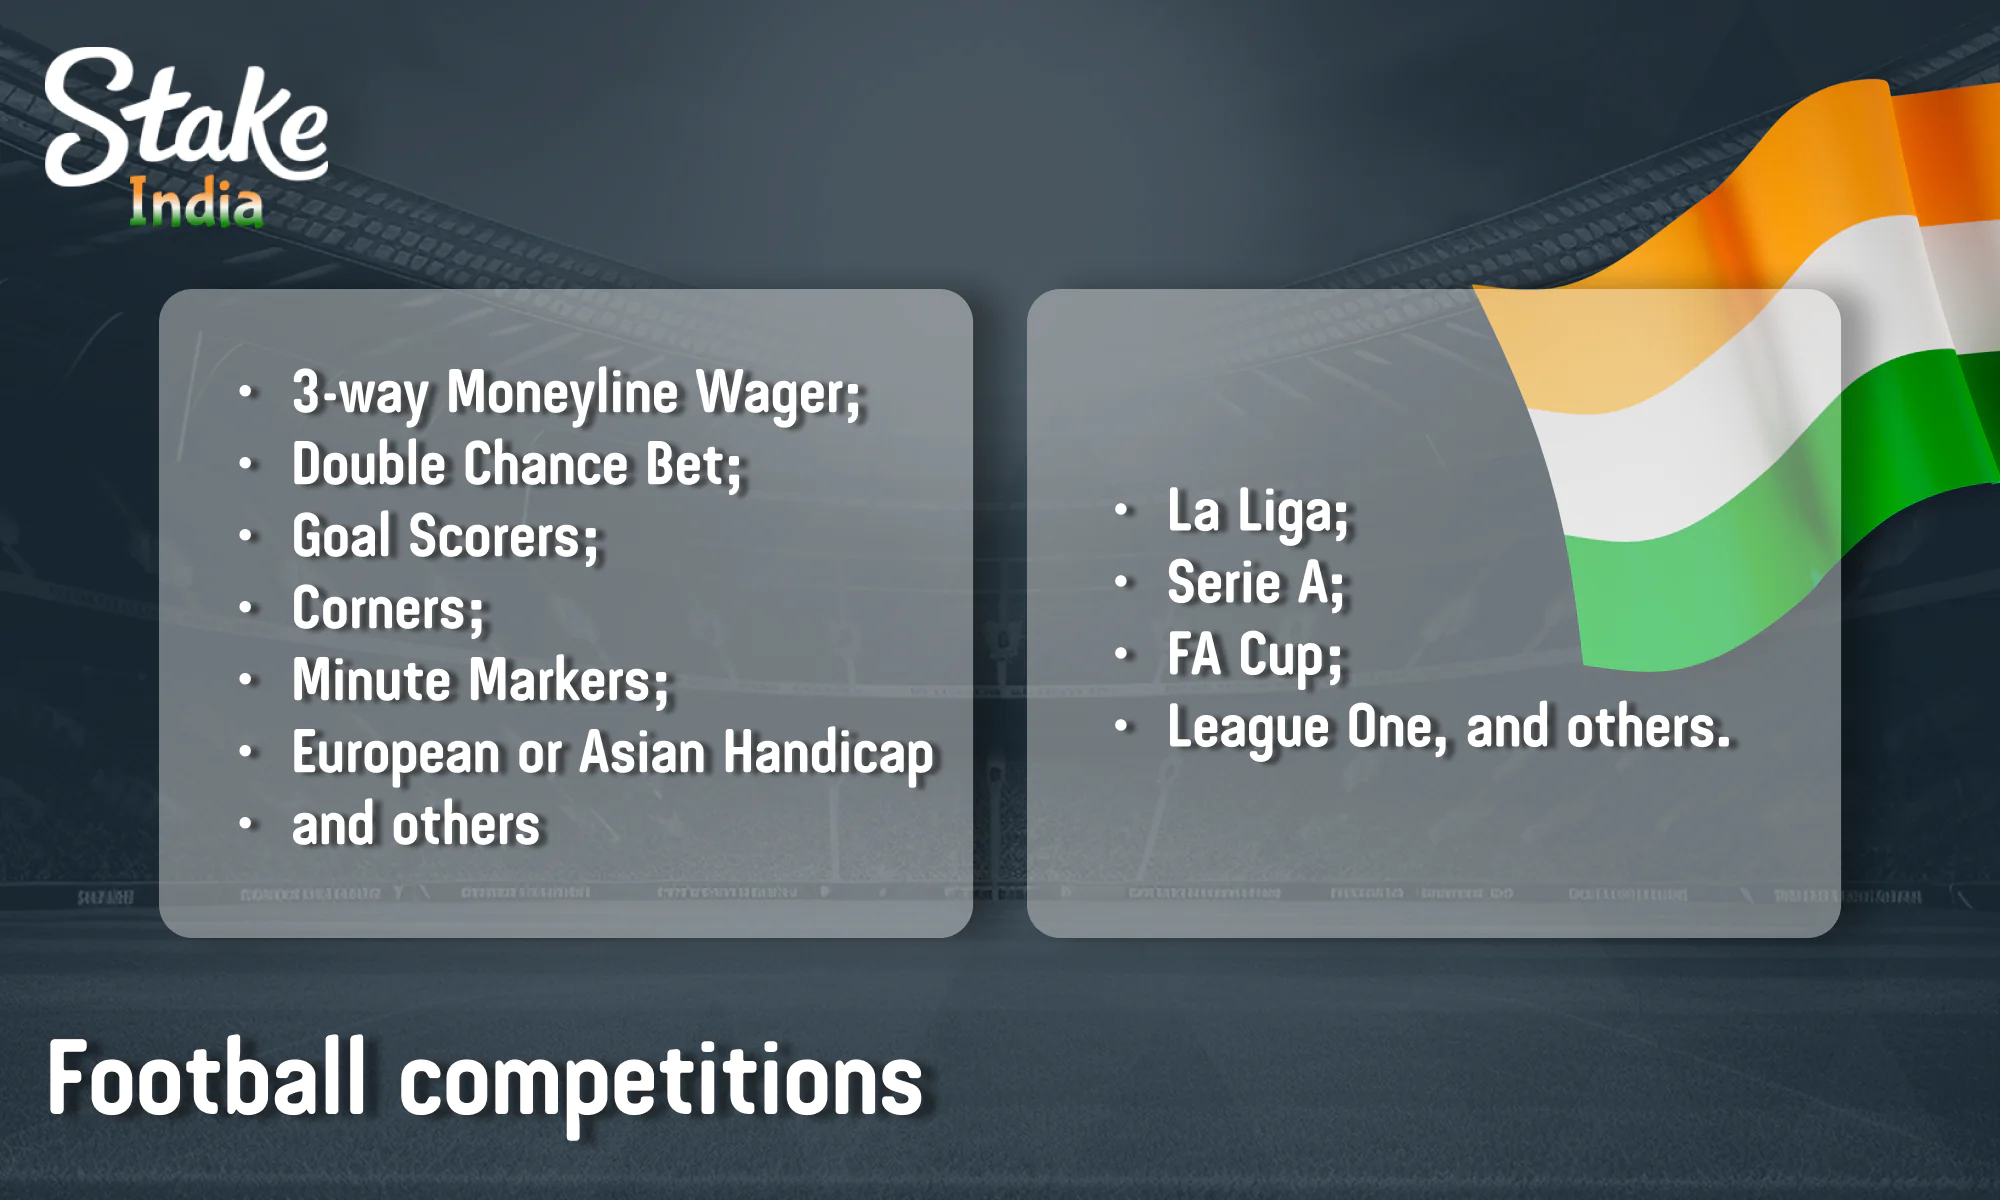 Football competitions for indian bettors - Stake India